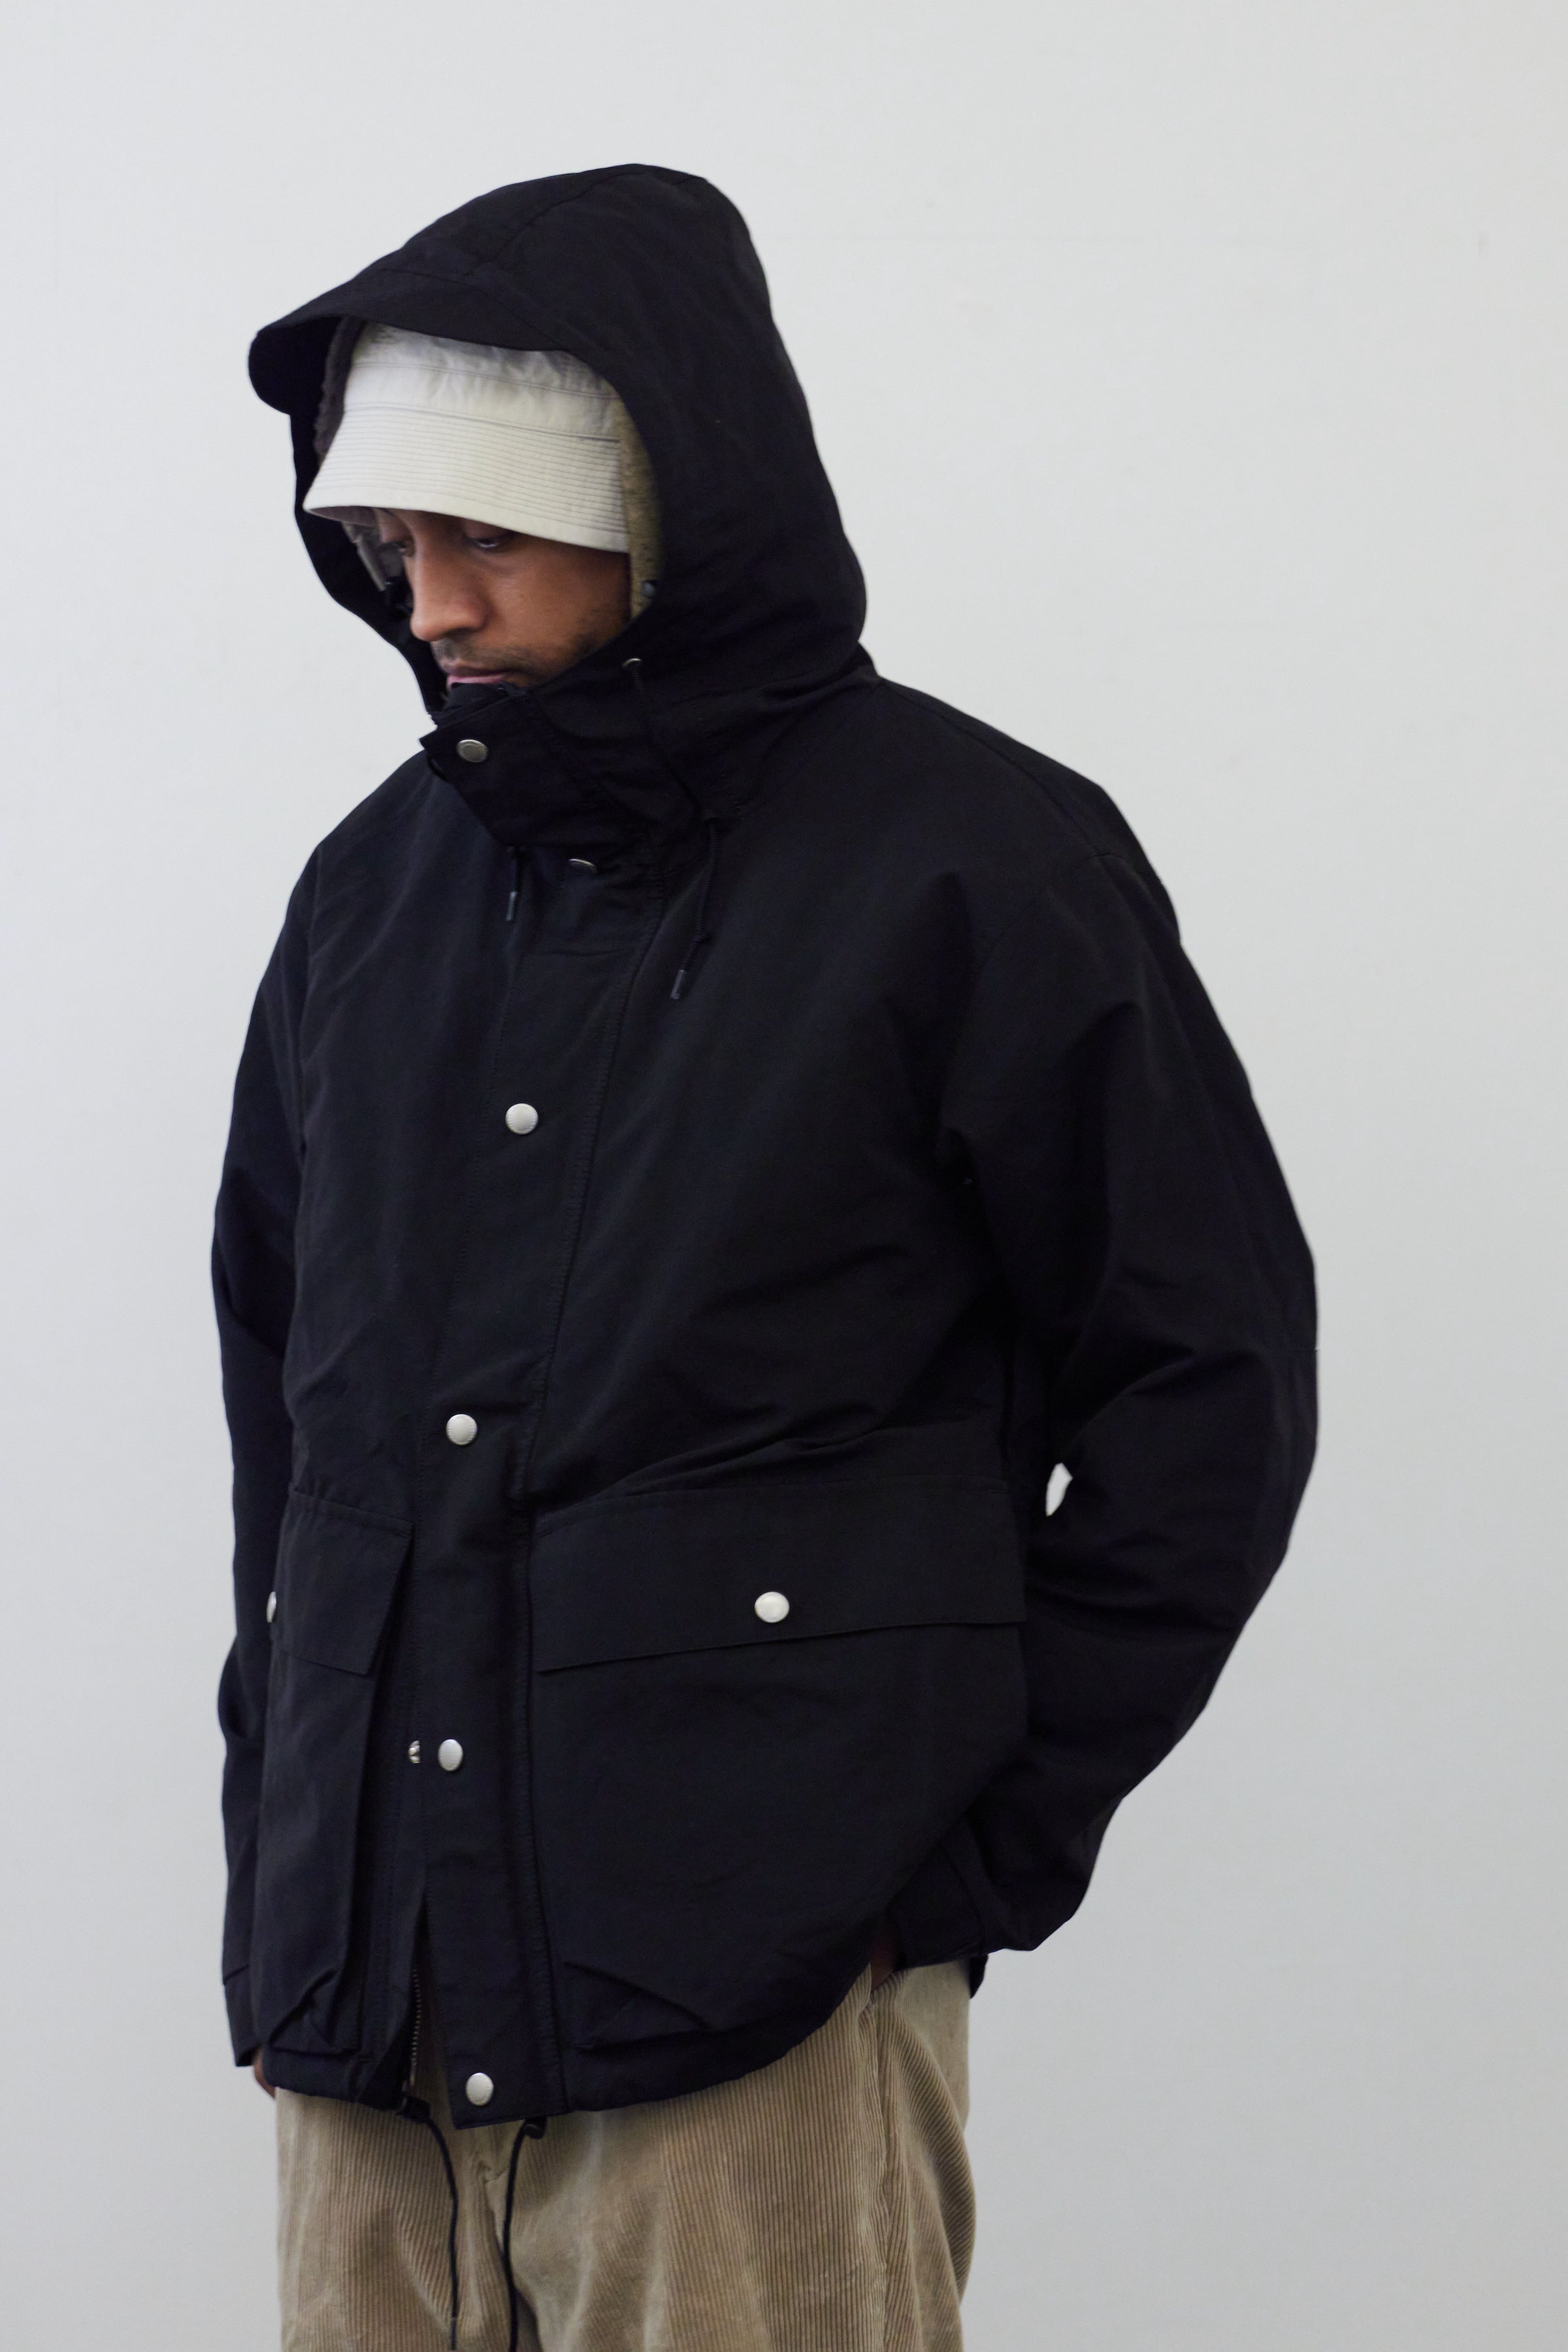 ENDS AND MEANS ”Sanpo Jacket” | 新潟セレクトshop james 